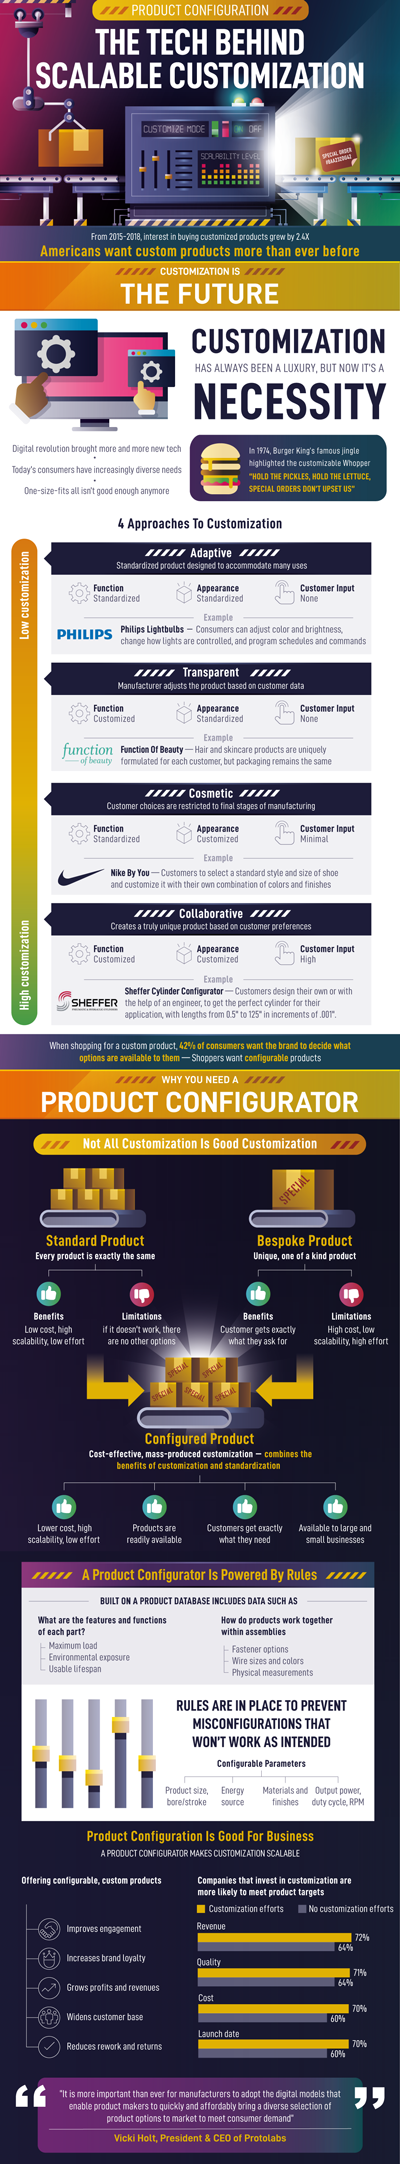 An infographic detailing how a product configurator can enable scalable customization.